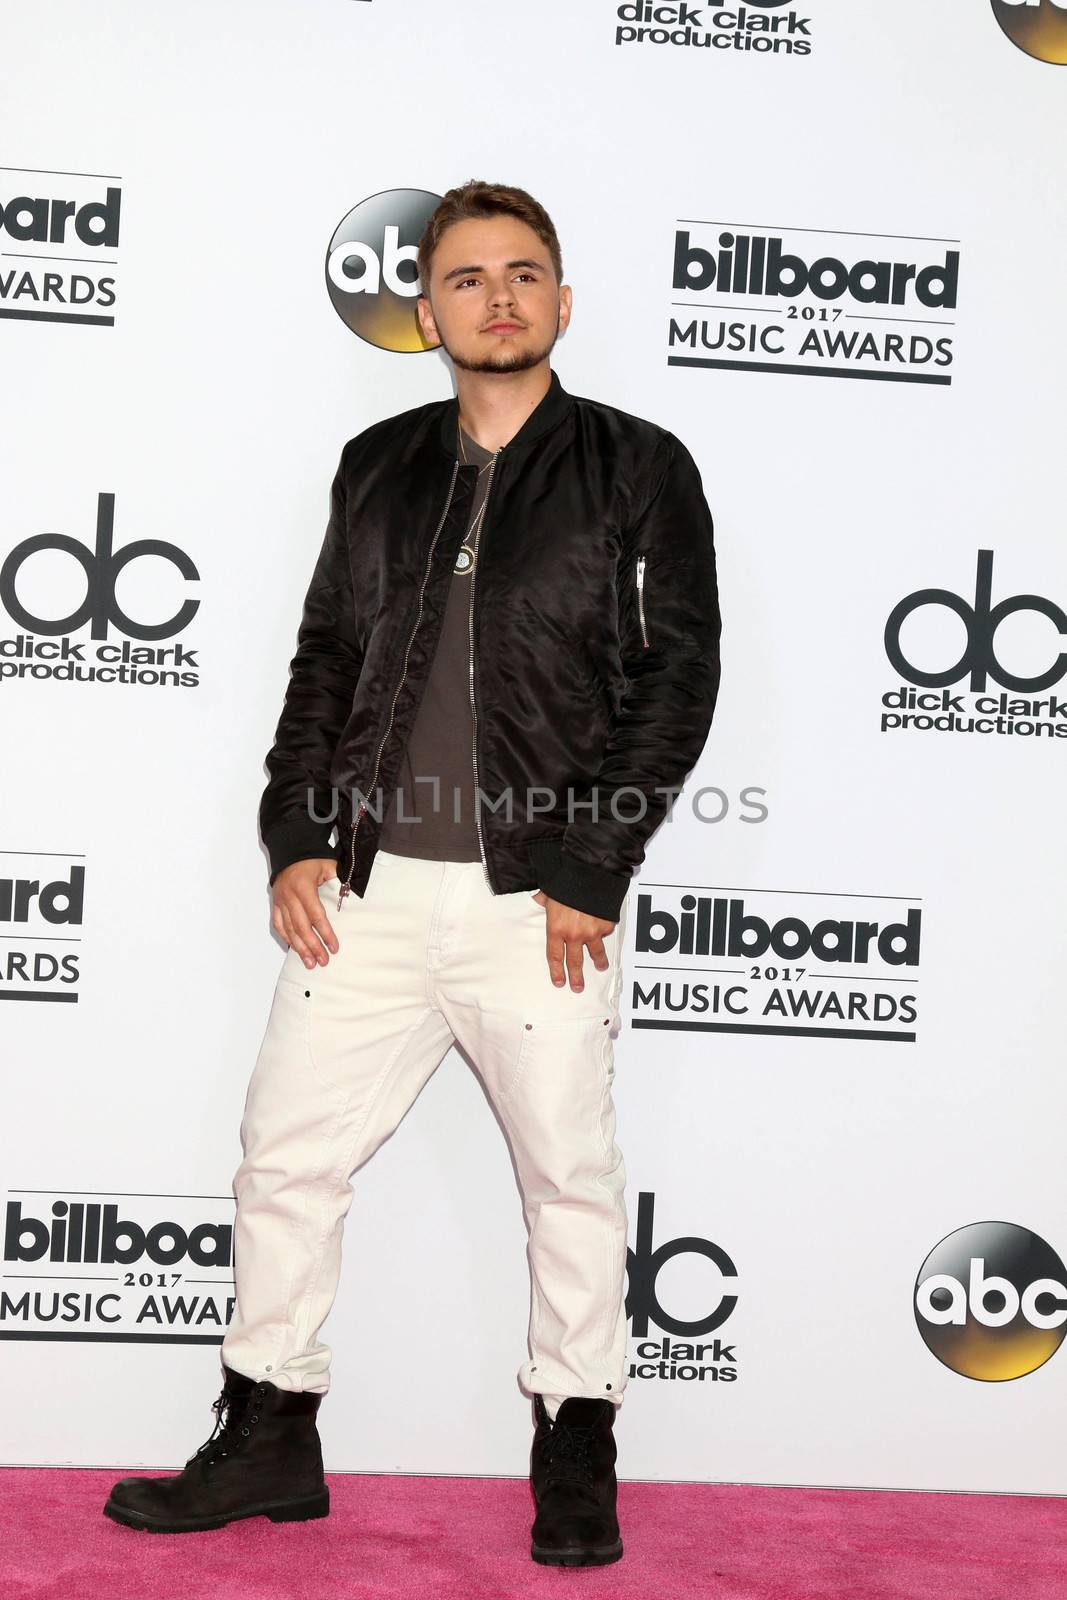 Prince Michael Jackson
at the 2017 Billboard Awards Press Room, T-Mobile Arena, Las Vegas, NV 05-21-17/ImageCollect by ImageCollect